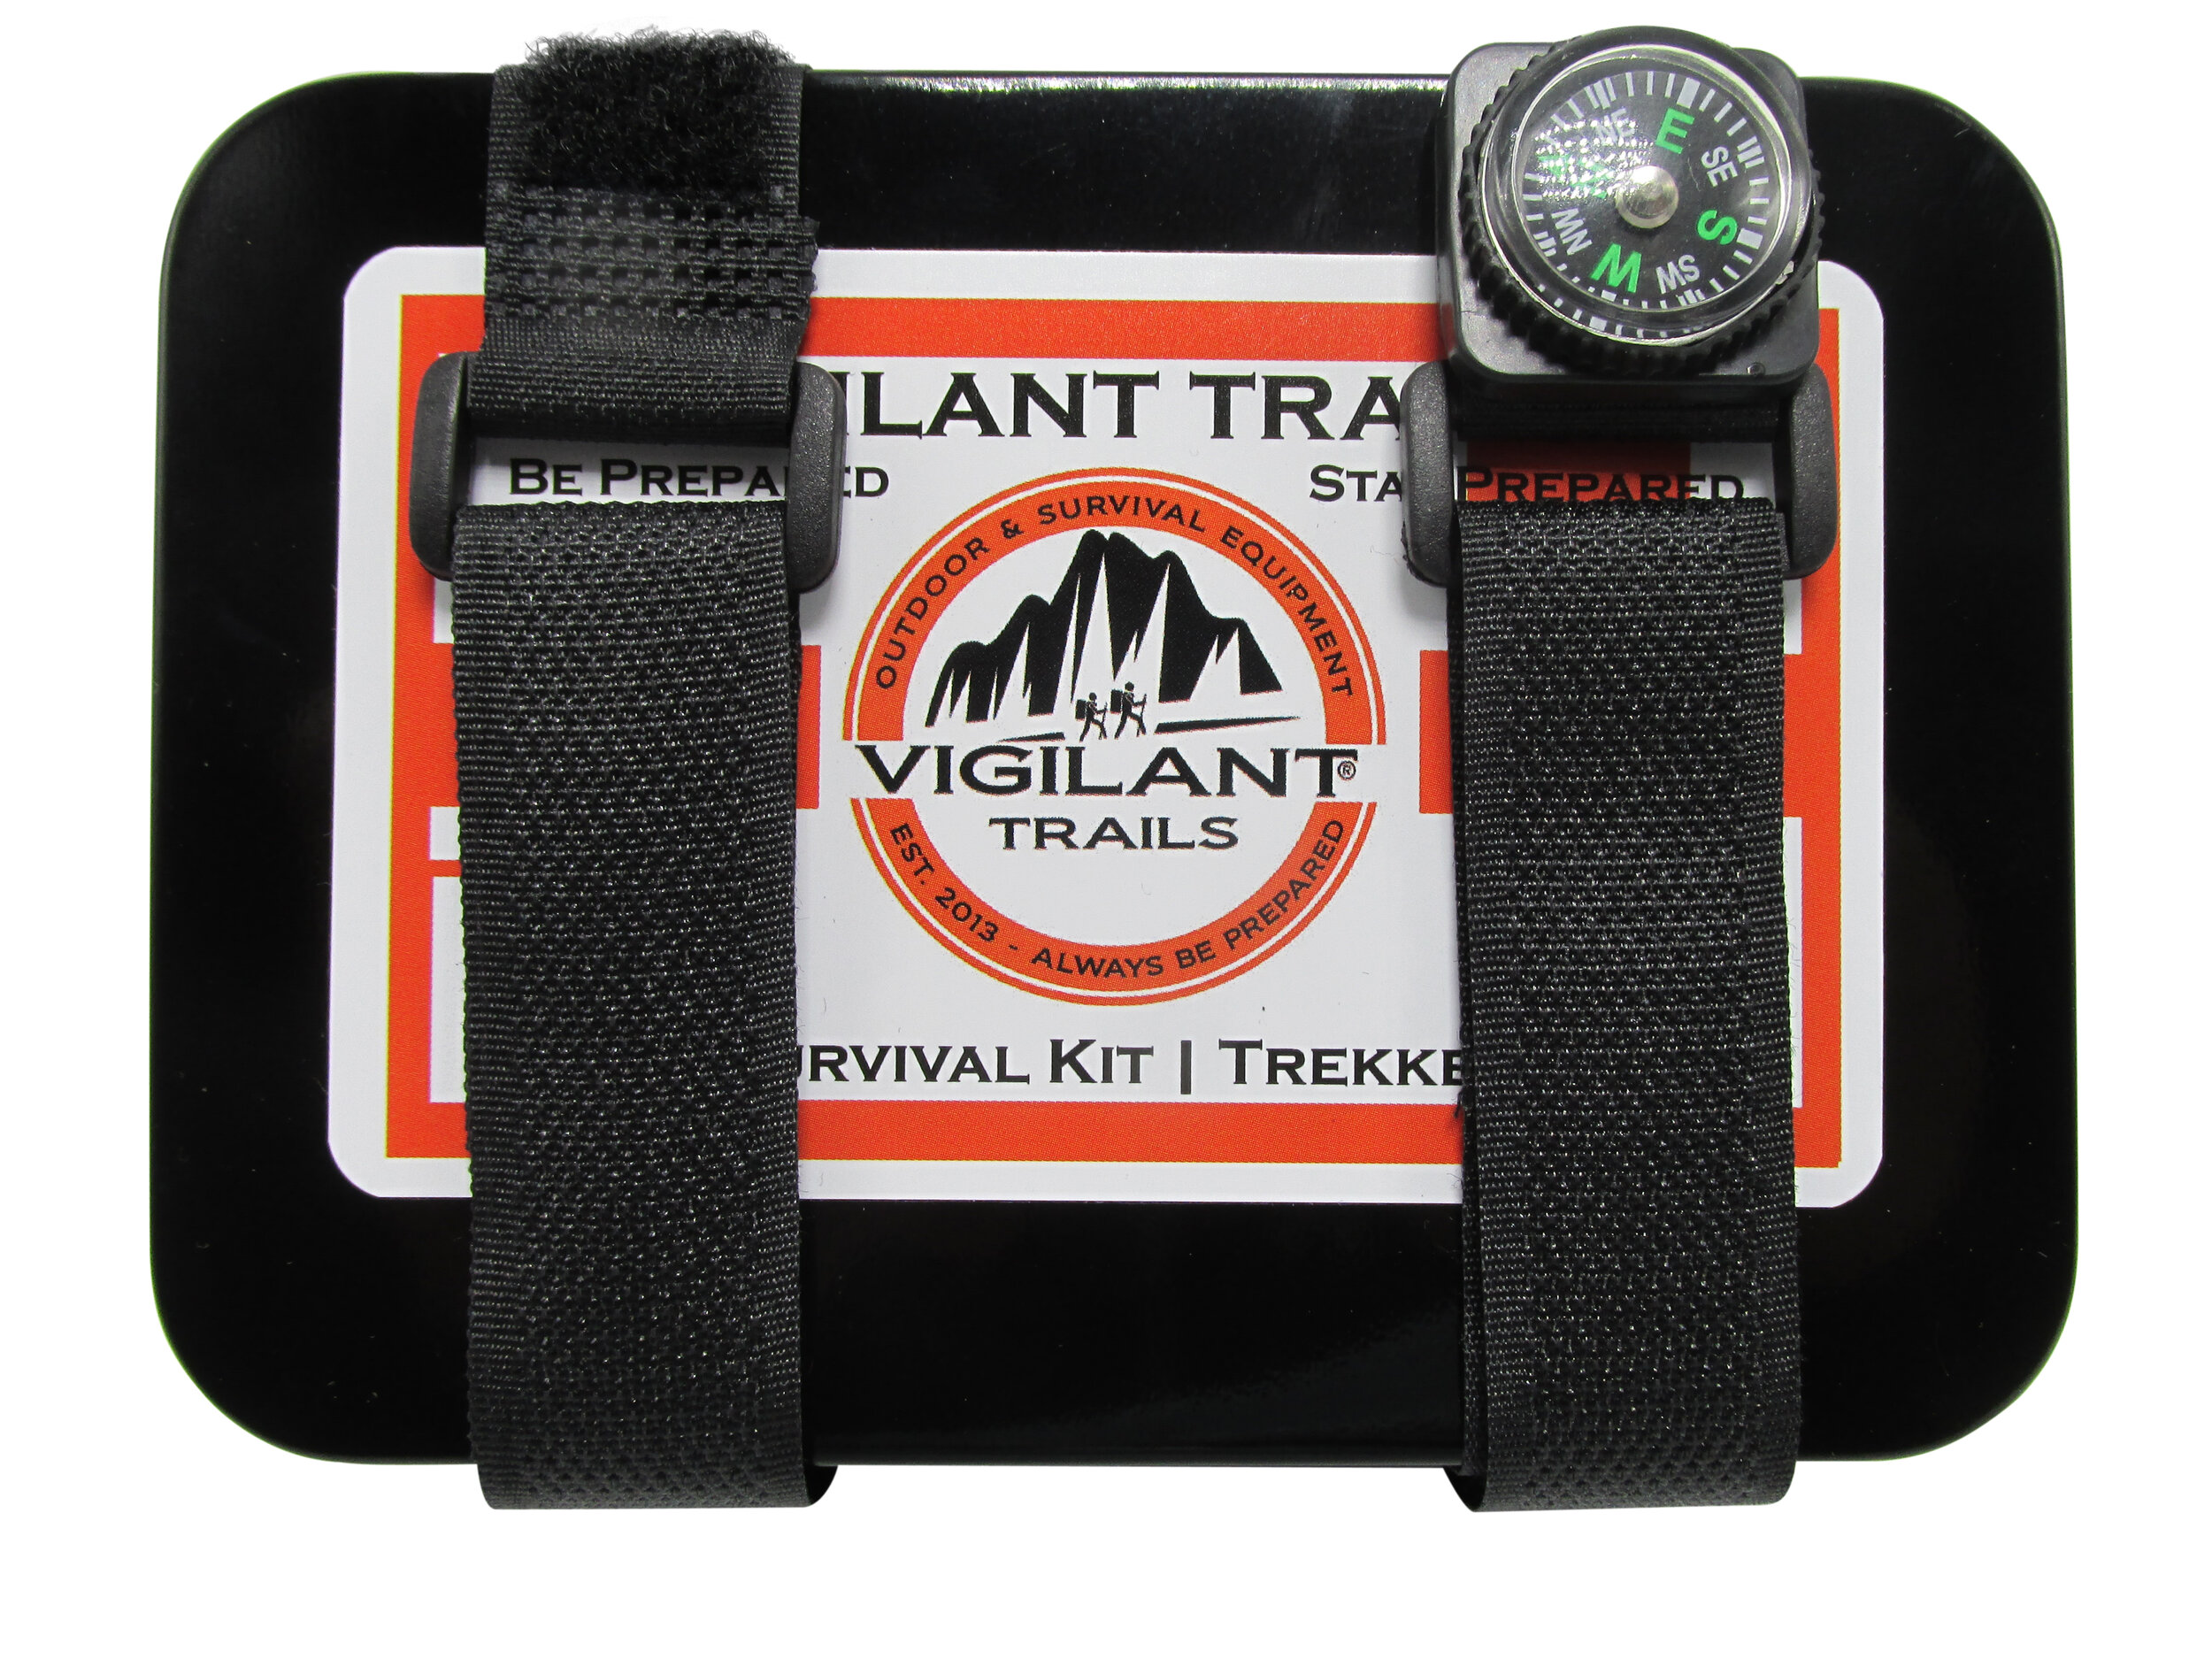 Vigilant Trails Pre-Packed Survival Sewing Kit Stage-2. Includes Zipper  Repair, Metal Awl, Thread, Waterproof Patches, Needles, Scissors, Buttons &  More — Vigilant Trails